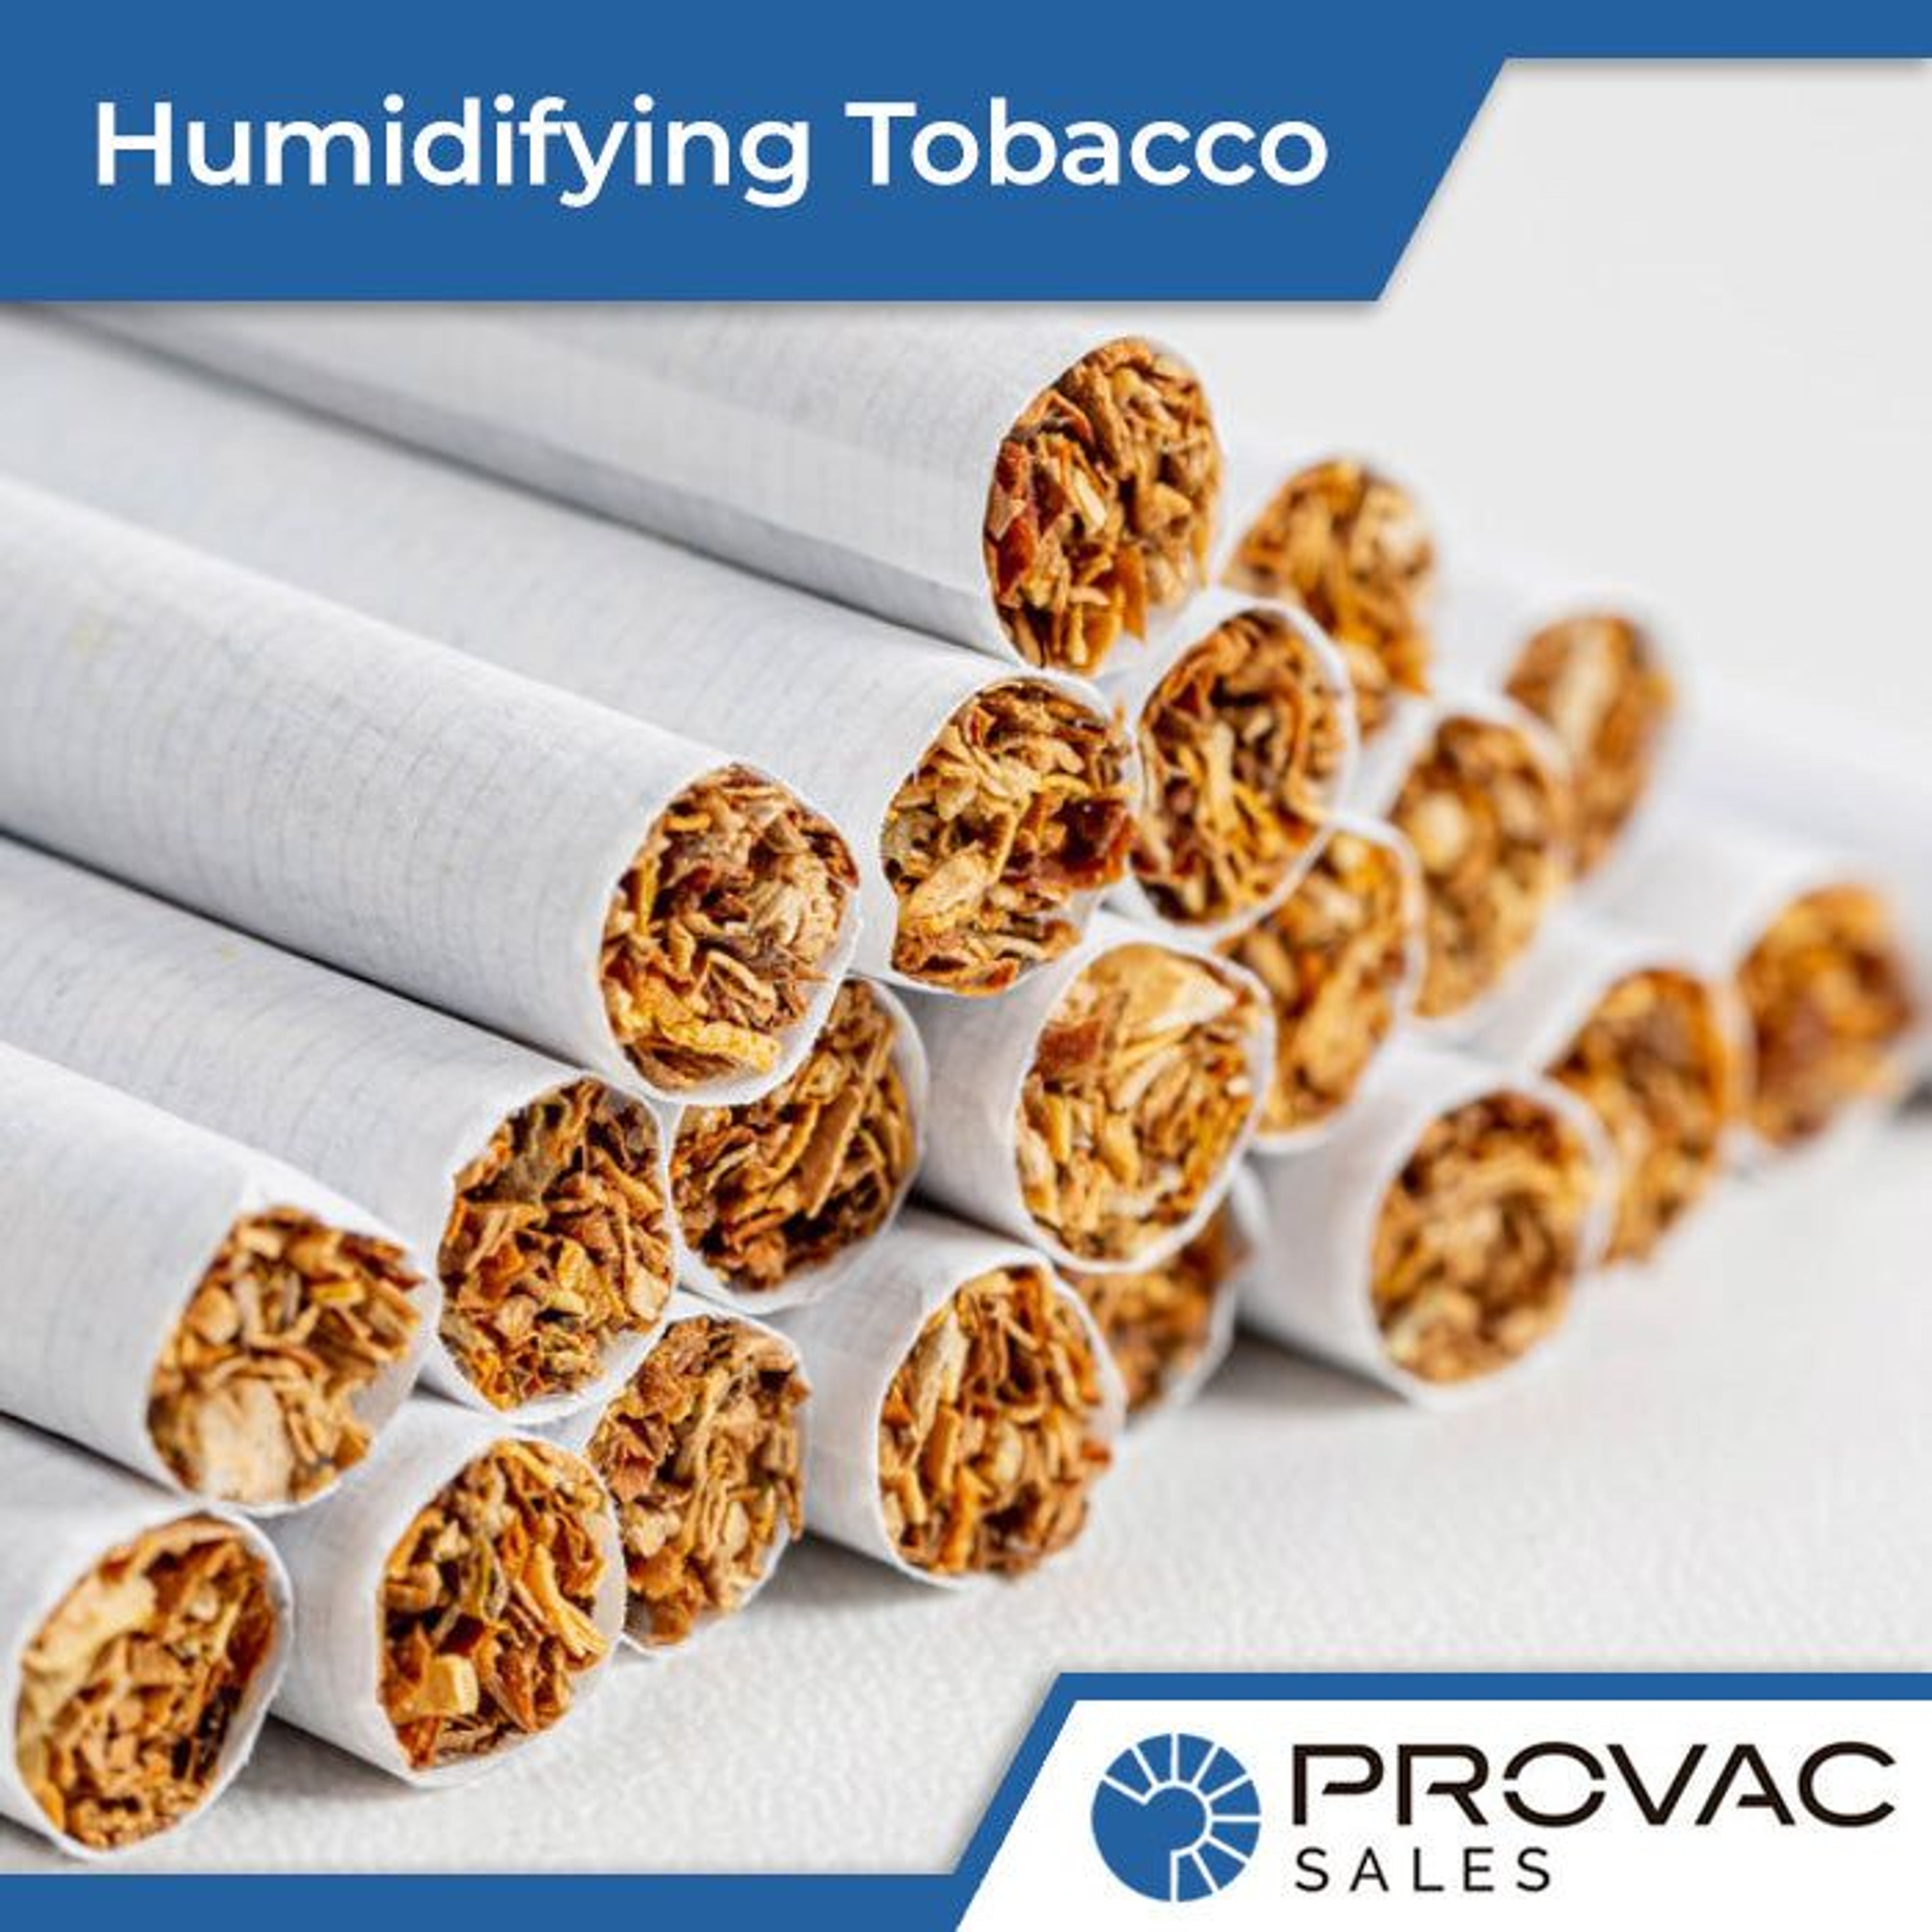 Humidification of Tobacco and The Role Vacuum Pumps Play Background